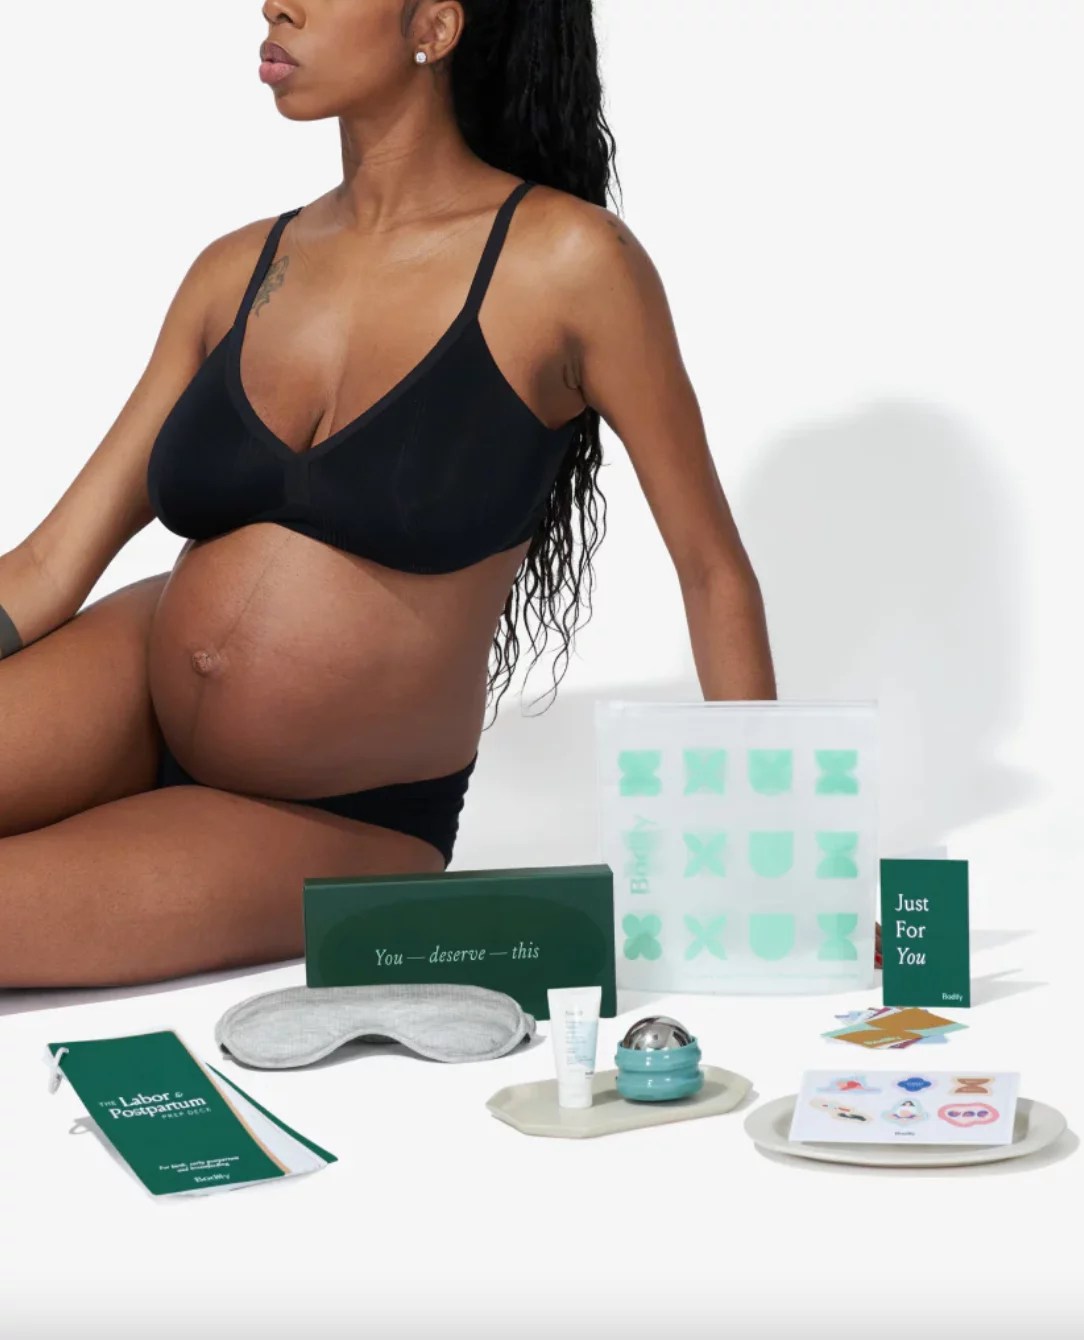 A pregnant woman in black lingerie with self-care items.